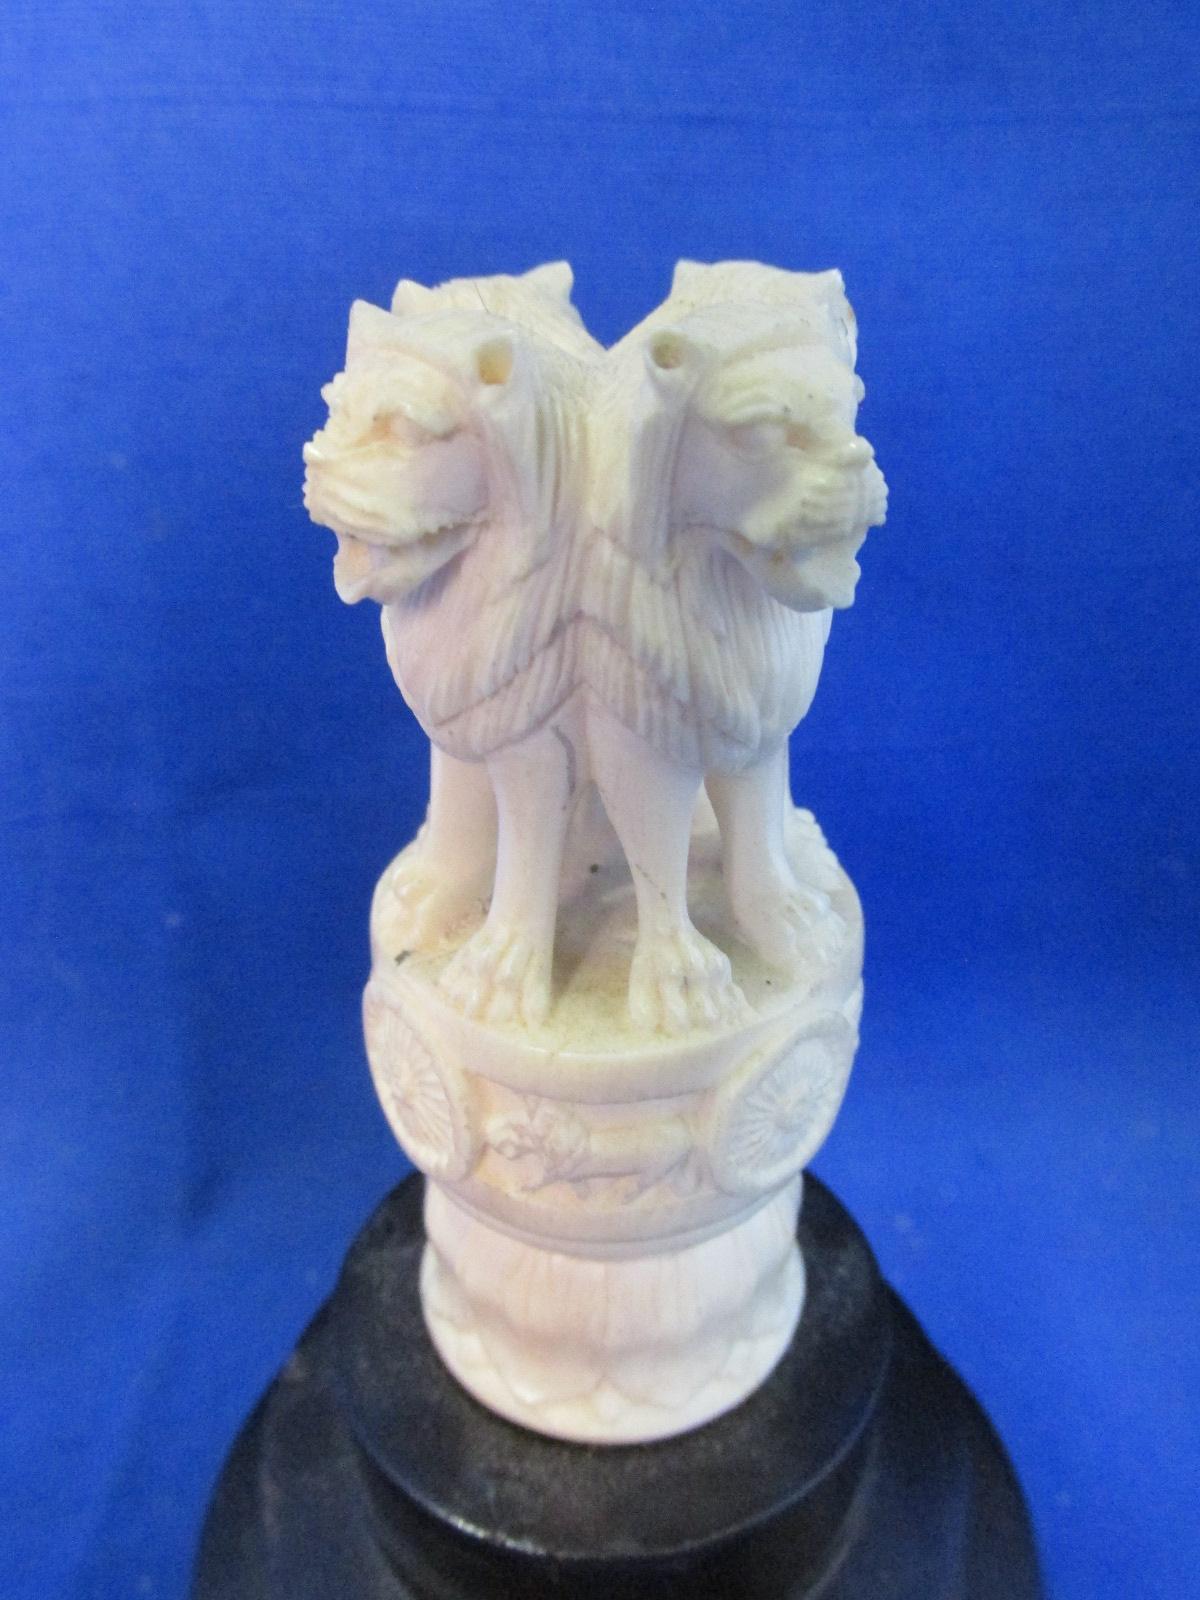 Oriental Art: Lion Capital of Ashkola Appx 4” Tall – Carved Figure 2 1/2” T on 3 tiered stand